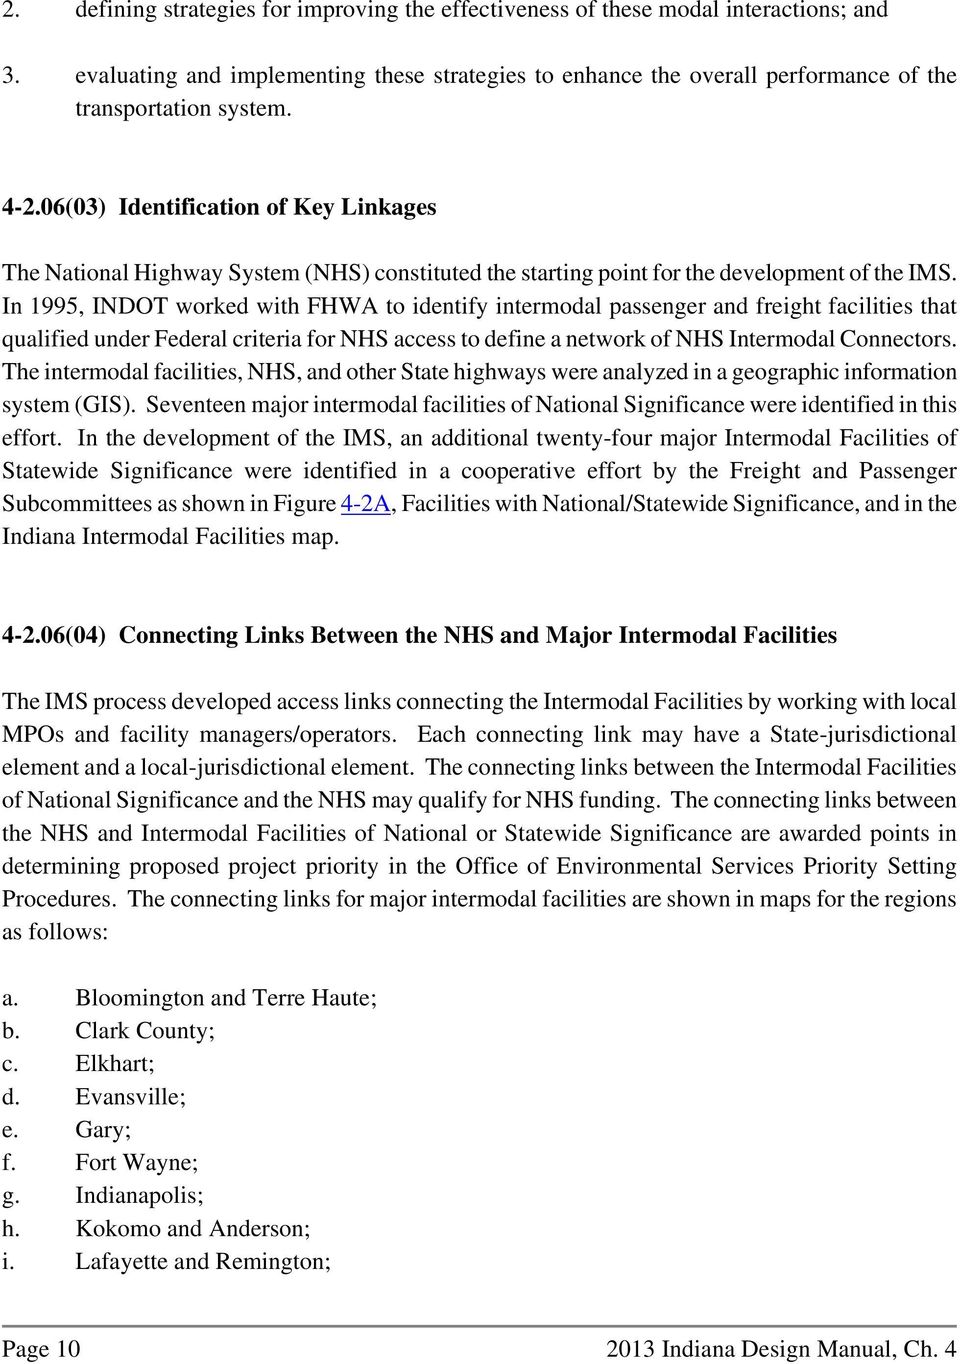 In 1995, INDOT worked with FHWA to identify intermodal passenger and freight facilities that qualified under Federal criteria for NHS access to define a network of NHS Intermodal Connectors.